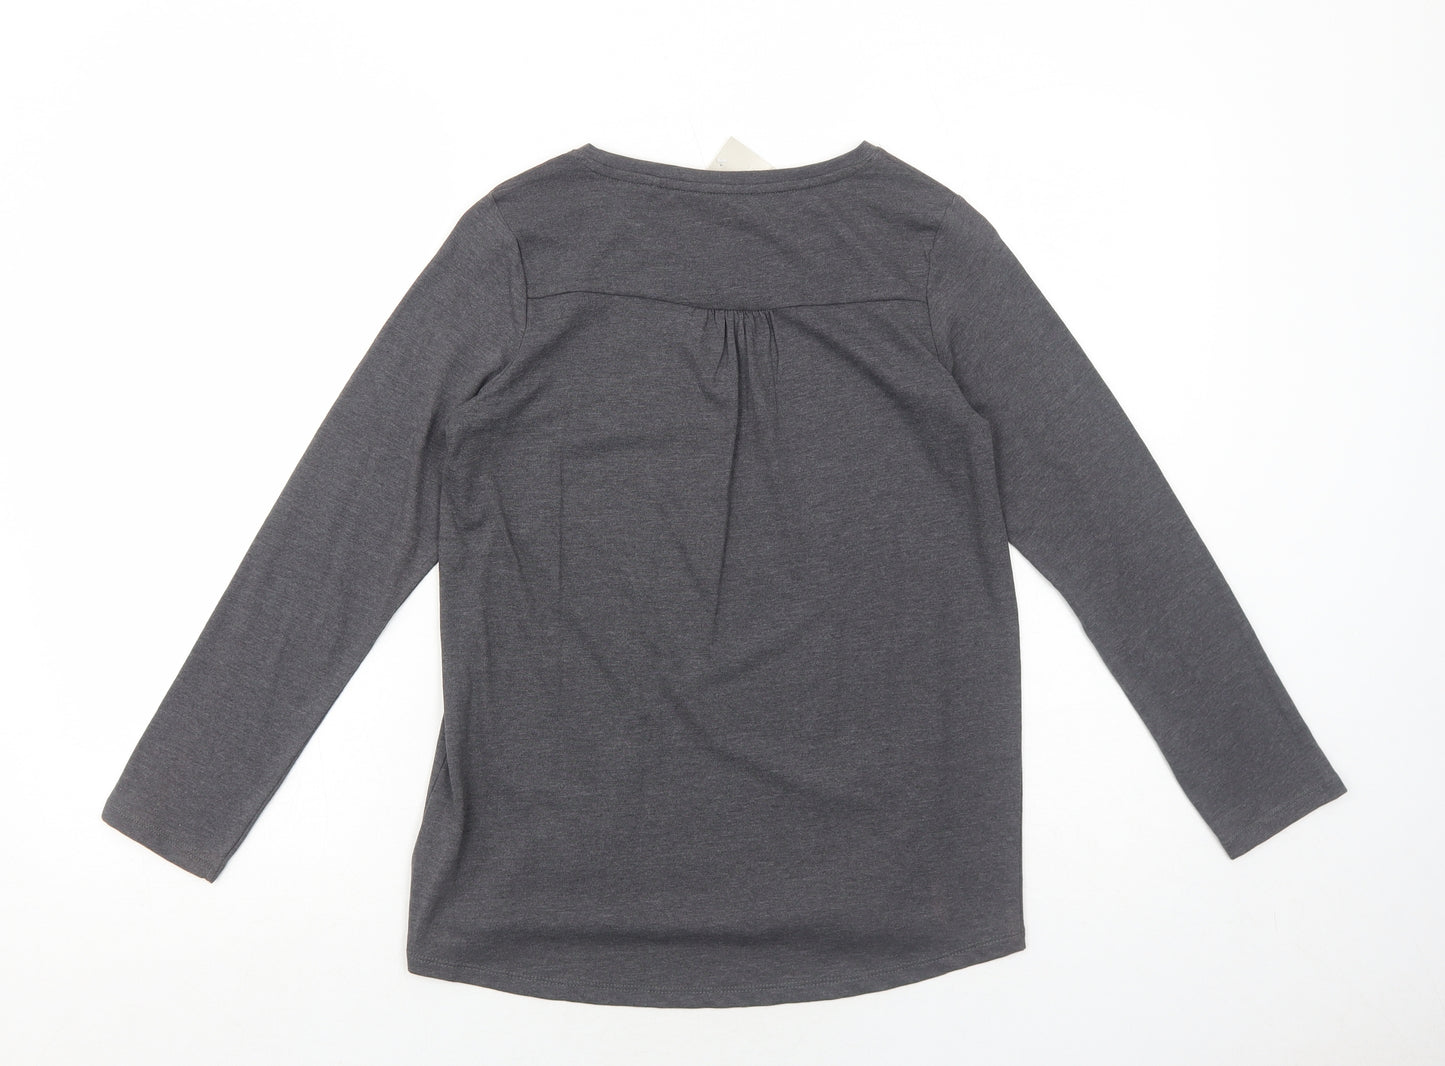 NEXT Girls Grey Cotton Pullover T-Shirt Size 12 Years Boat Neck Pullover - All You Need is Sparkle